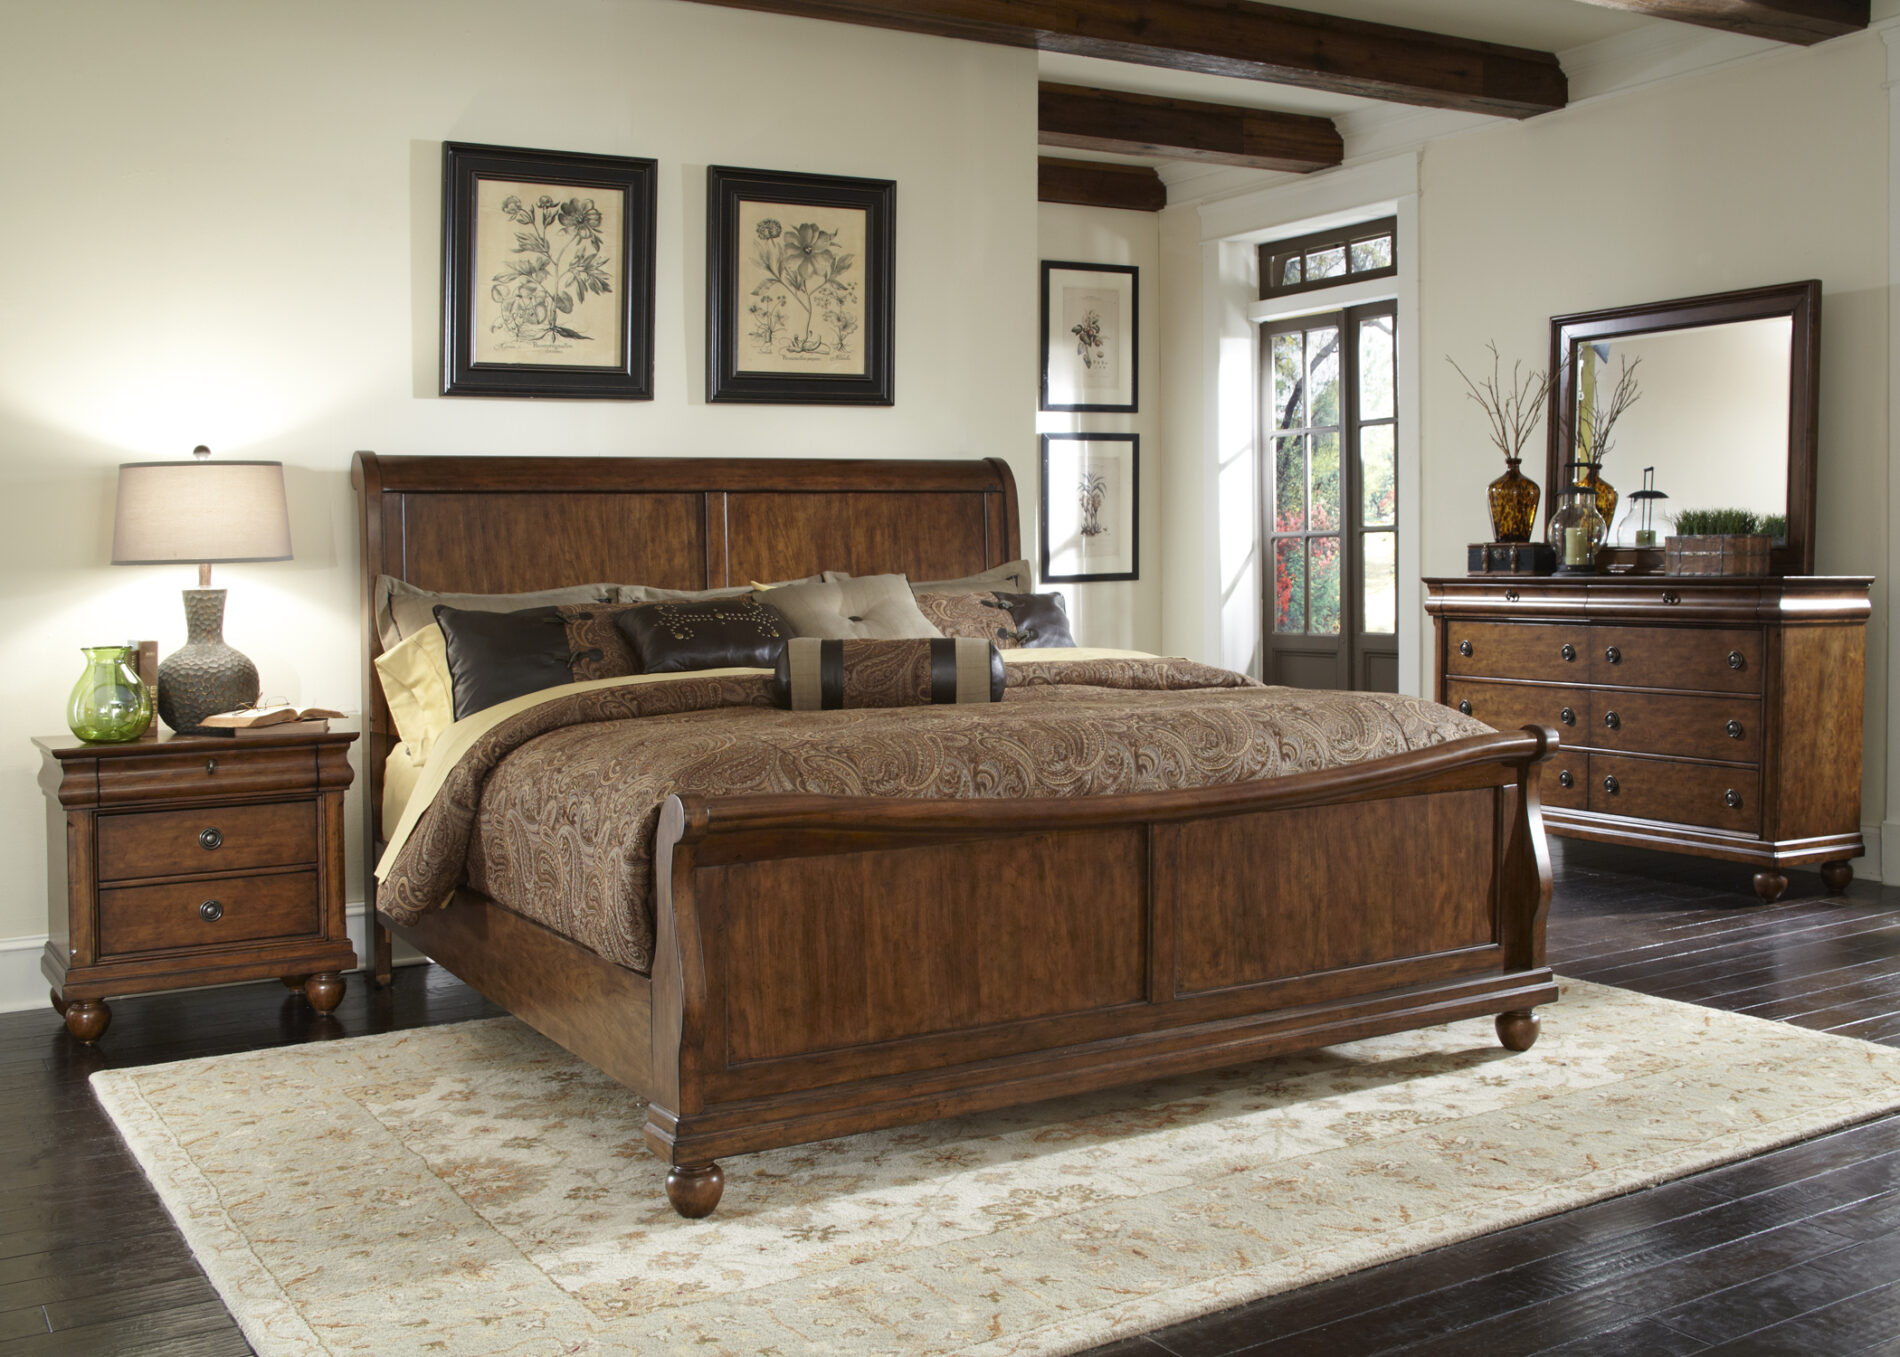 pictures of rustic bedroom furniture